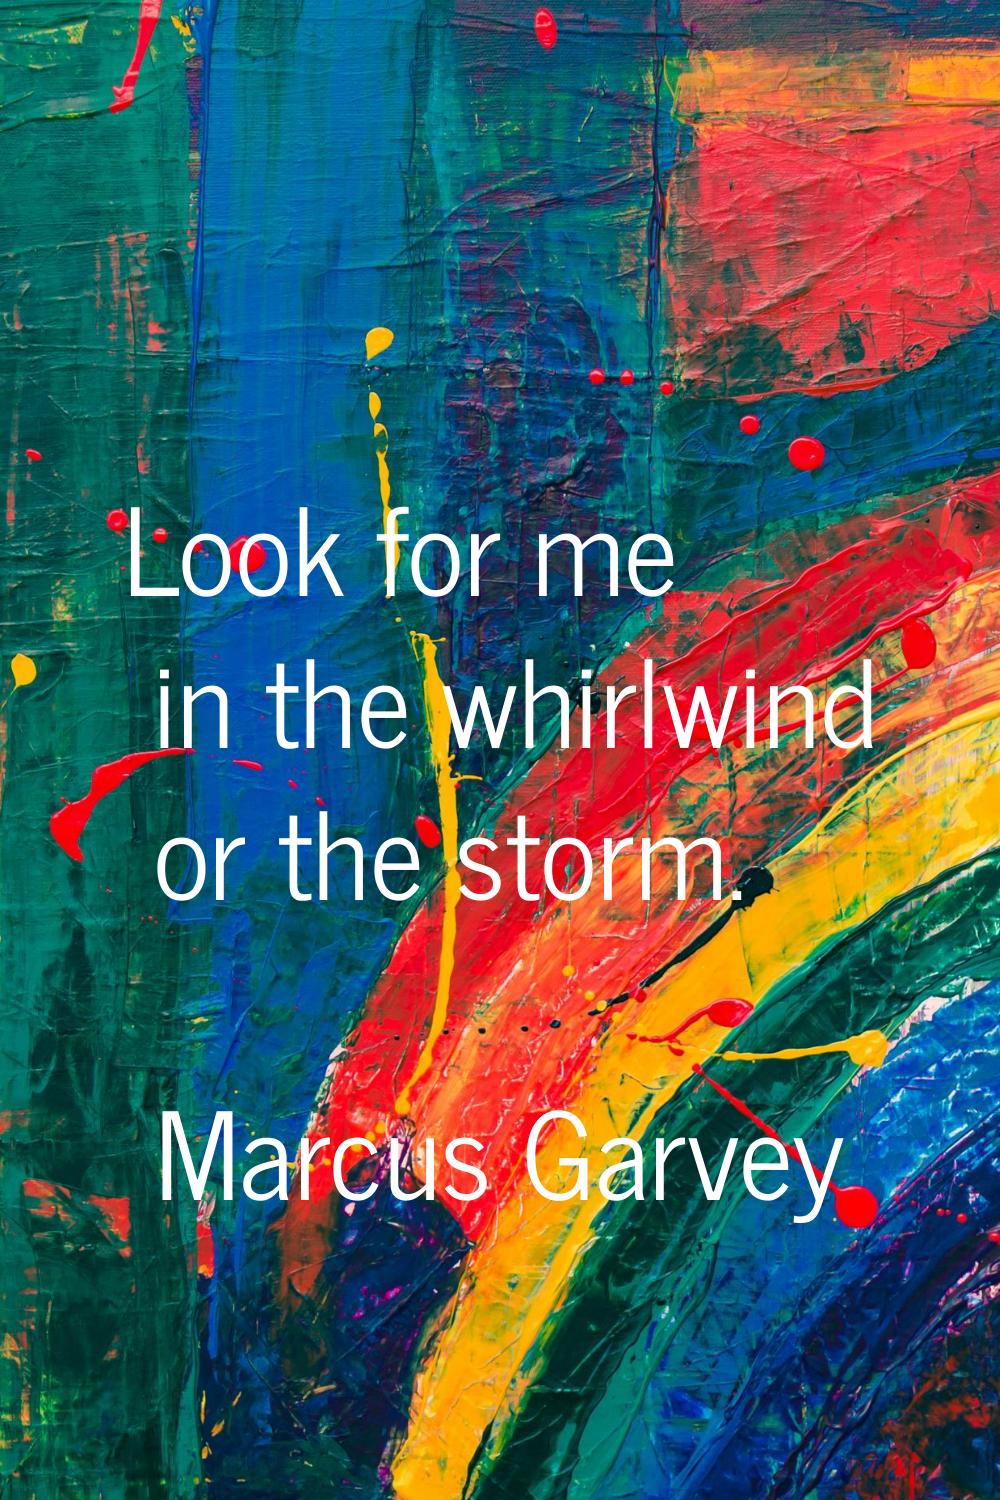 Look for me in the whirlwind or the storm.